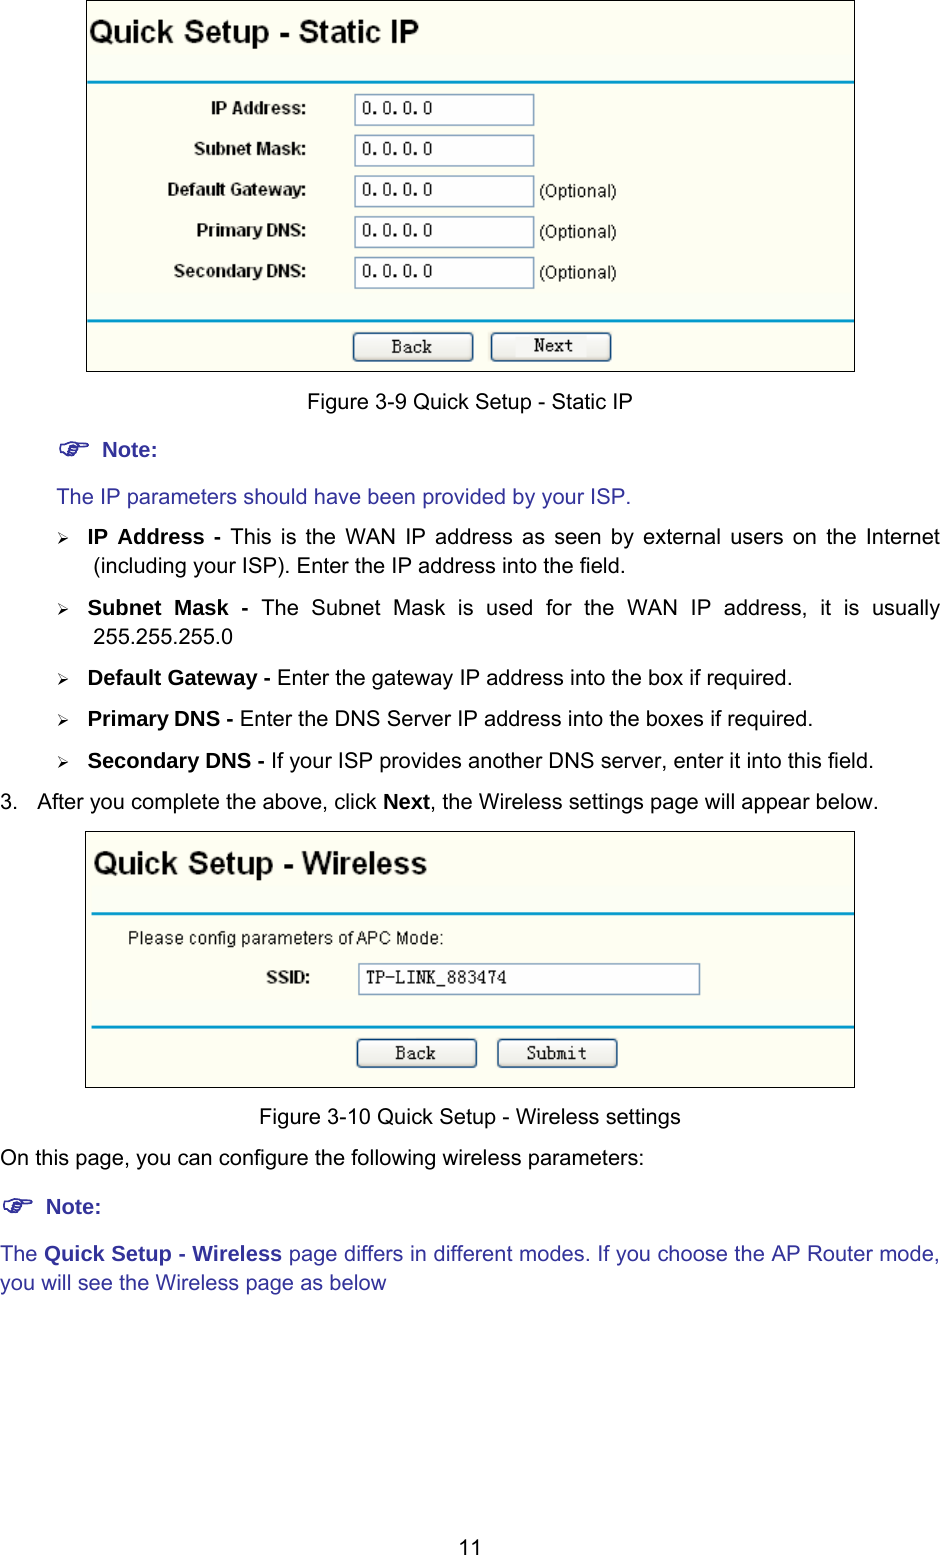  11  Figure 3-9 Quick Setup - Static IP ) Note: The IP parameters should have been provided by your ISP. ¾ IP Address - This is the WAN IP address as seen by external users on the Internet (including your ISP). Enter the IP address into the field. ¾ Subnet Mask - The Subnet Mask is used for the WAN IP address, it is usually 255.255.255.0 ¾ Default Gateway - Enter the gateway IP address into the box if required. ¾ Primary DNS - Enter the DNS Server IP address into the boxes if required. ¾ Secondary DNS - If your ISP provides another DNS server, enter it into this field. 3.  After you complete the above, click Next, the Wireless settings page will appear below.  Figure 3-10 Quick Setup - Wireless settings On this page, you can configure the following wireless parameters: ) Note: The Quick Setup - Wireless page differs in different modes. If you choose the AP Router mode, you will see the Wireless page as below 